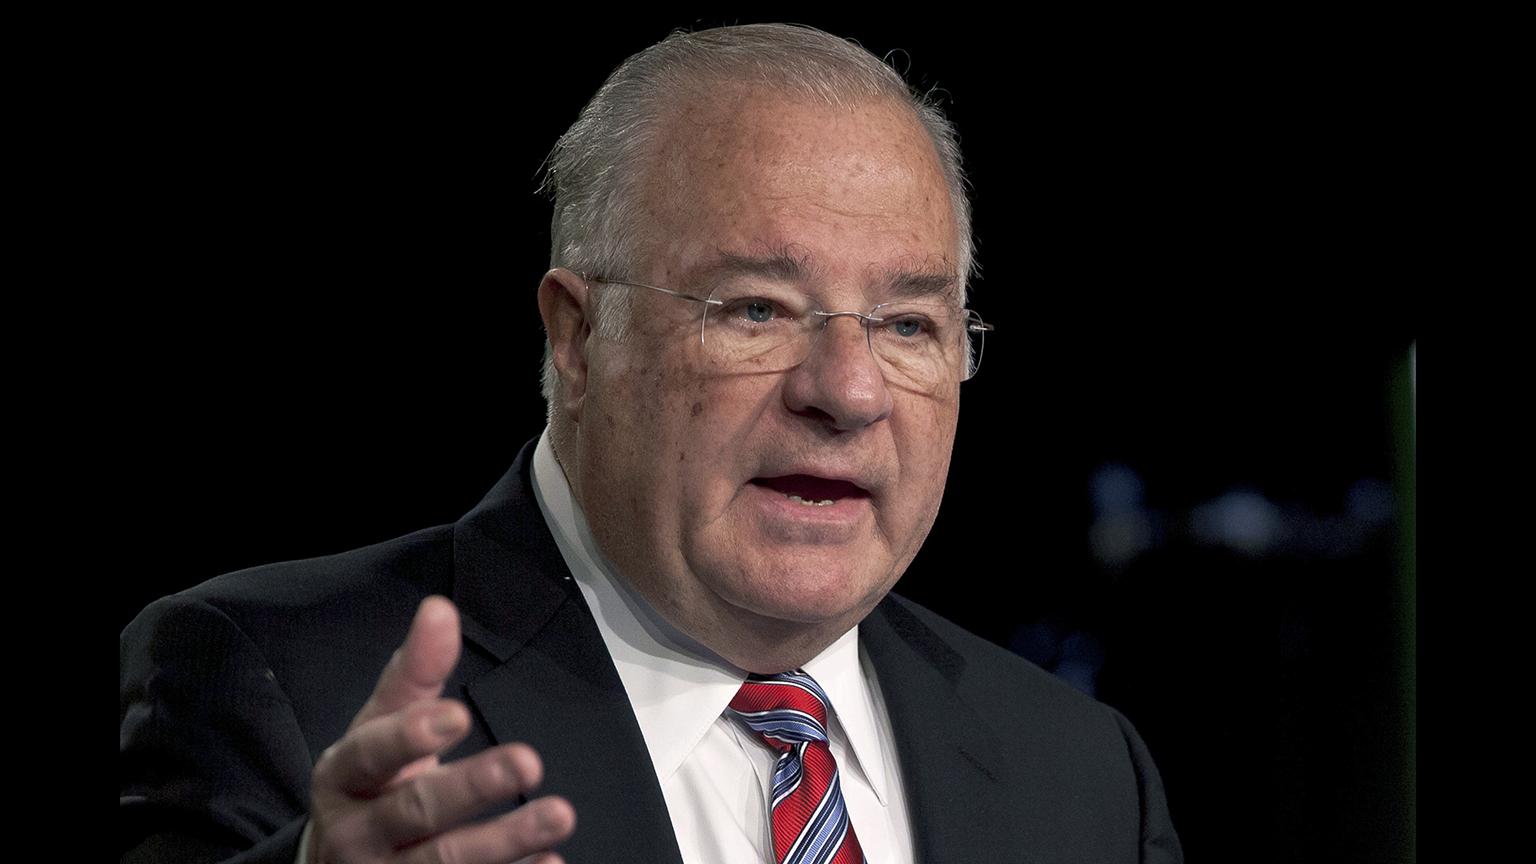 In this Feb. 14, 2012 file photo, online brokerage TD Ameritrade founder Joe Ricketts speaks during a ceremonial unveiling of his portrait which will hang in company headquarters in Omaha, Nebraska. (AP Photo / Nati Harnik, File)